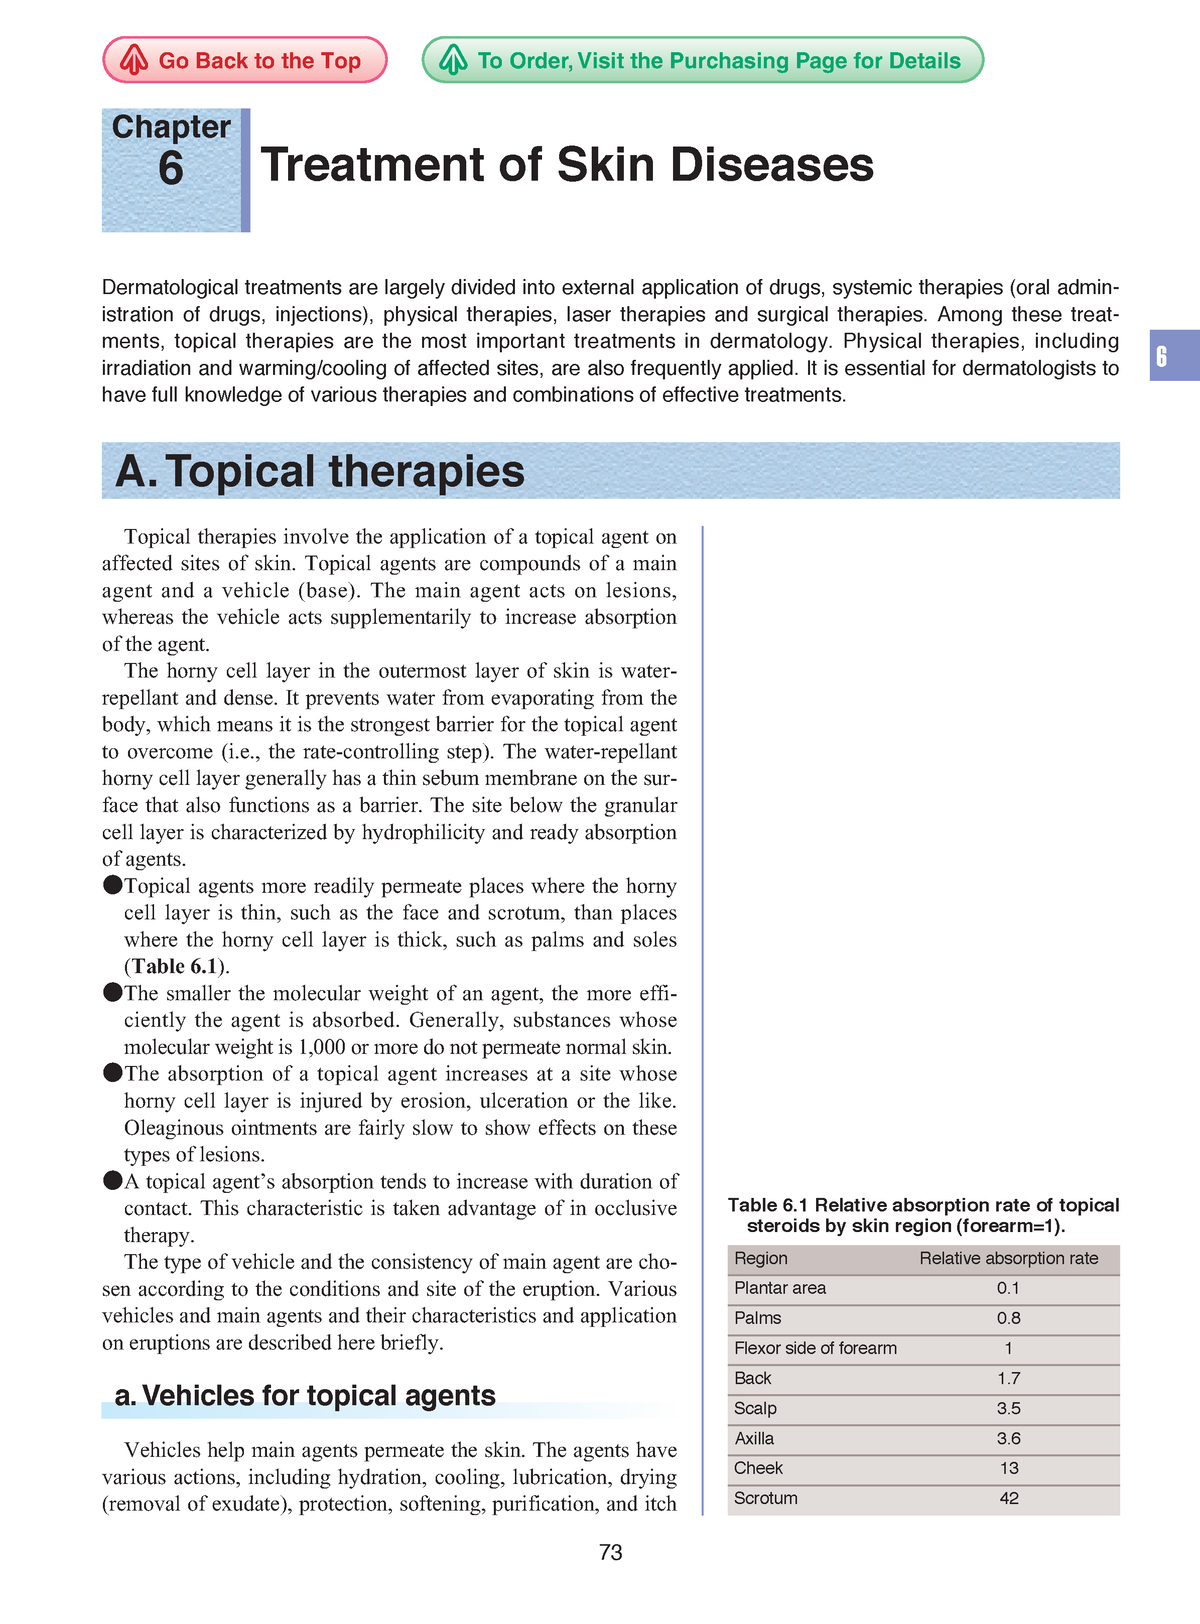 research topics about dermatology